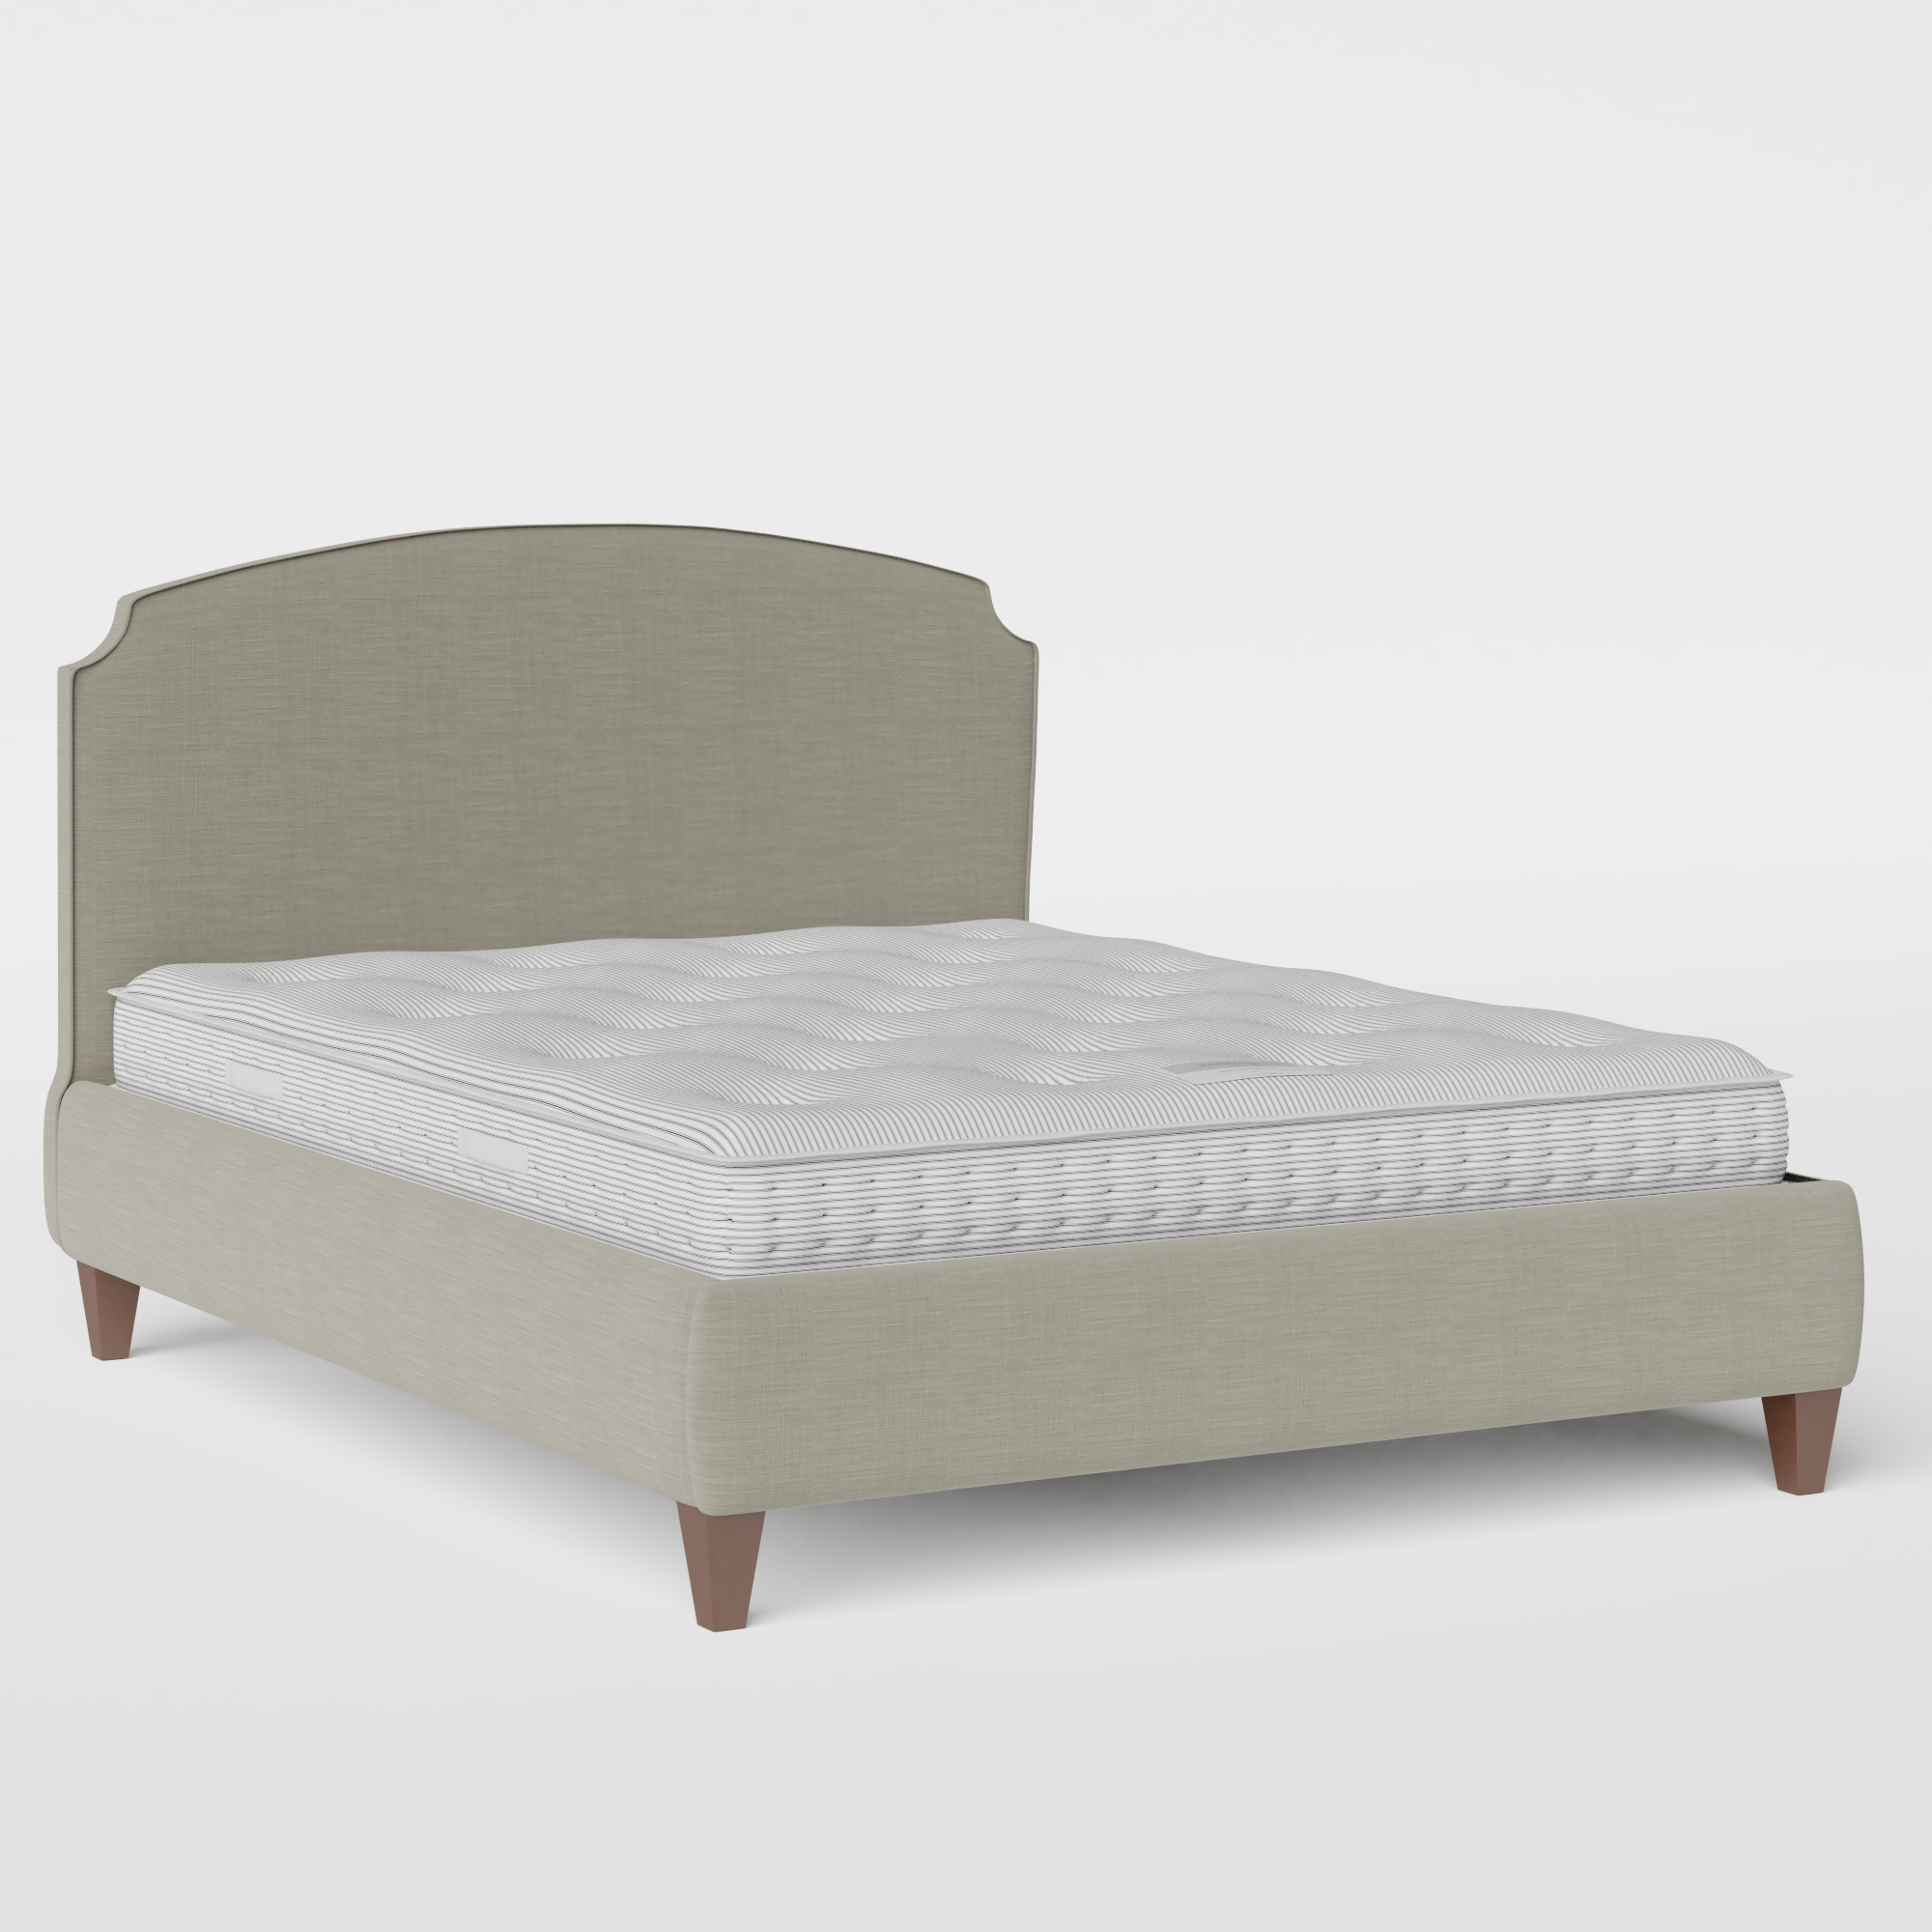 Lide with Piping upholstered bed in grey fabric